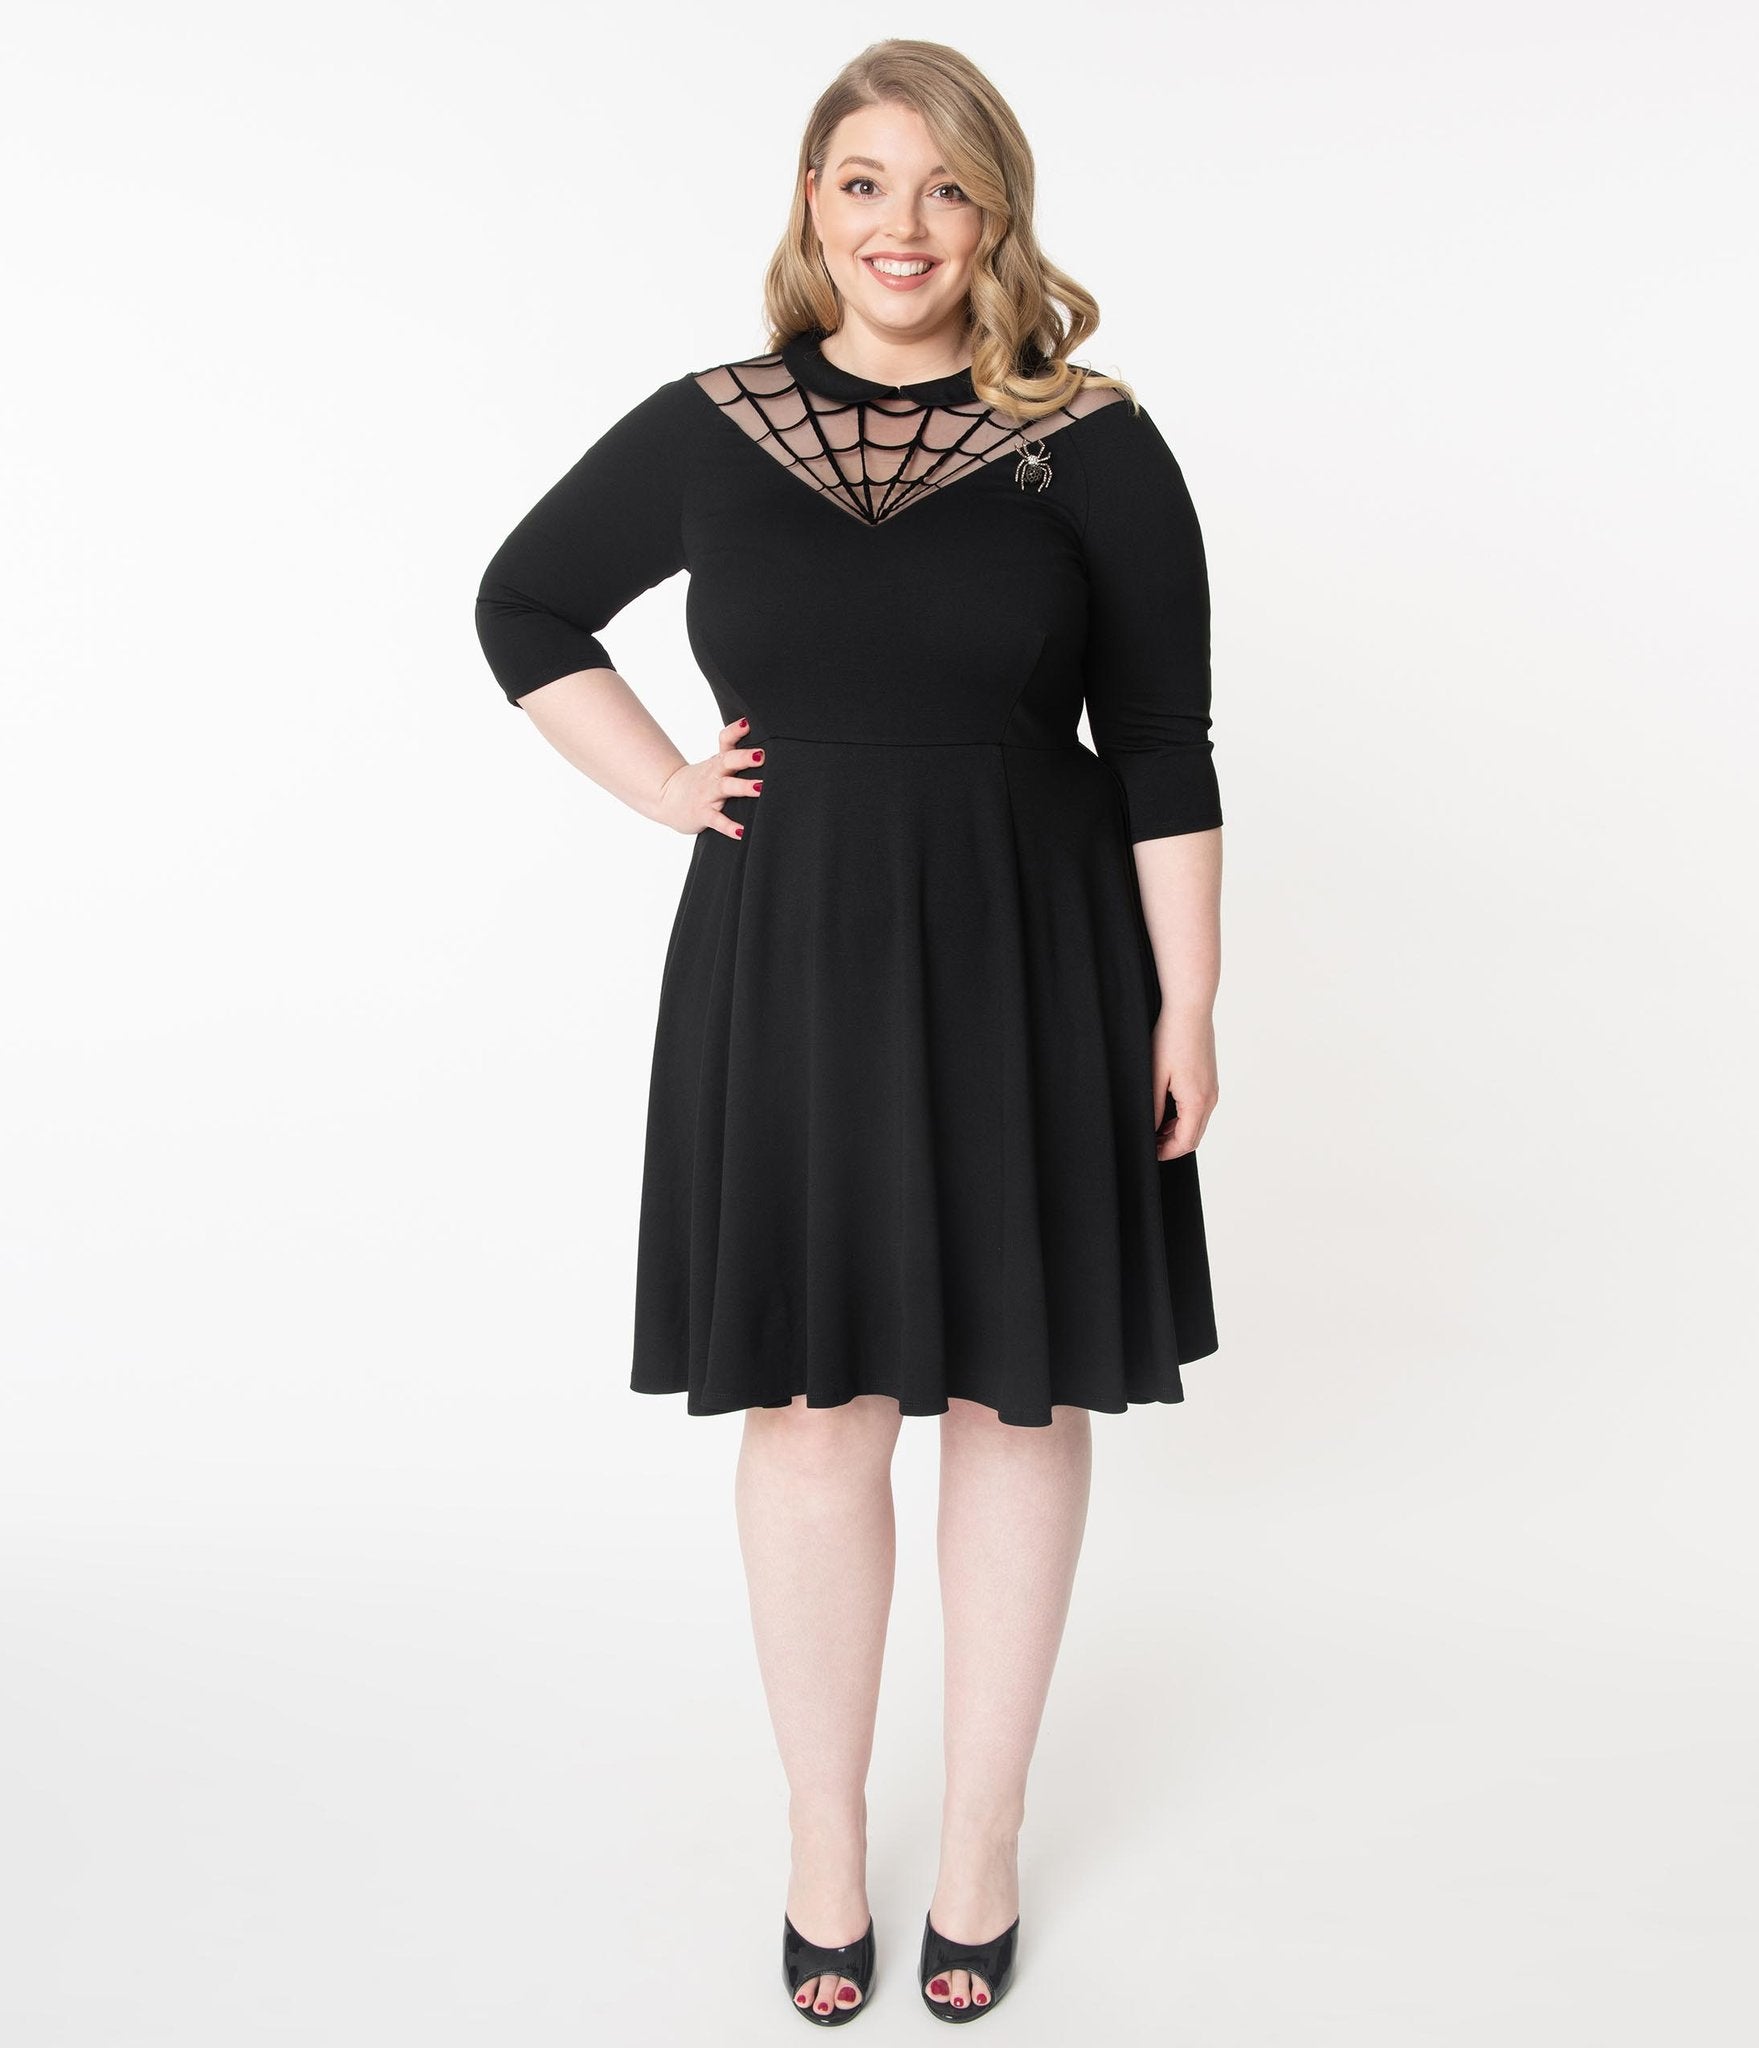 This is a black Unique Vintage flare dress that has a spiderweb neck, Peter Pan collar, 3/4 sleeves and the plus model is wearing black shoes.